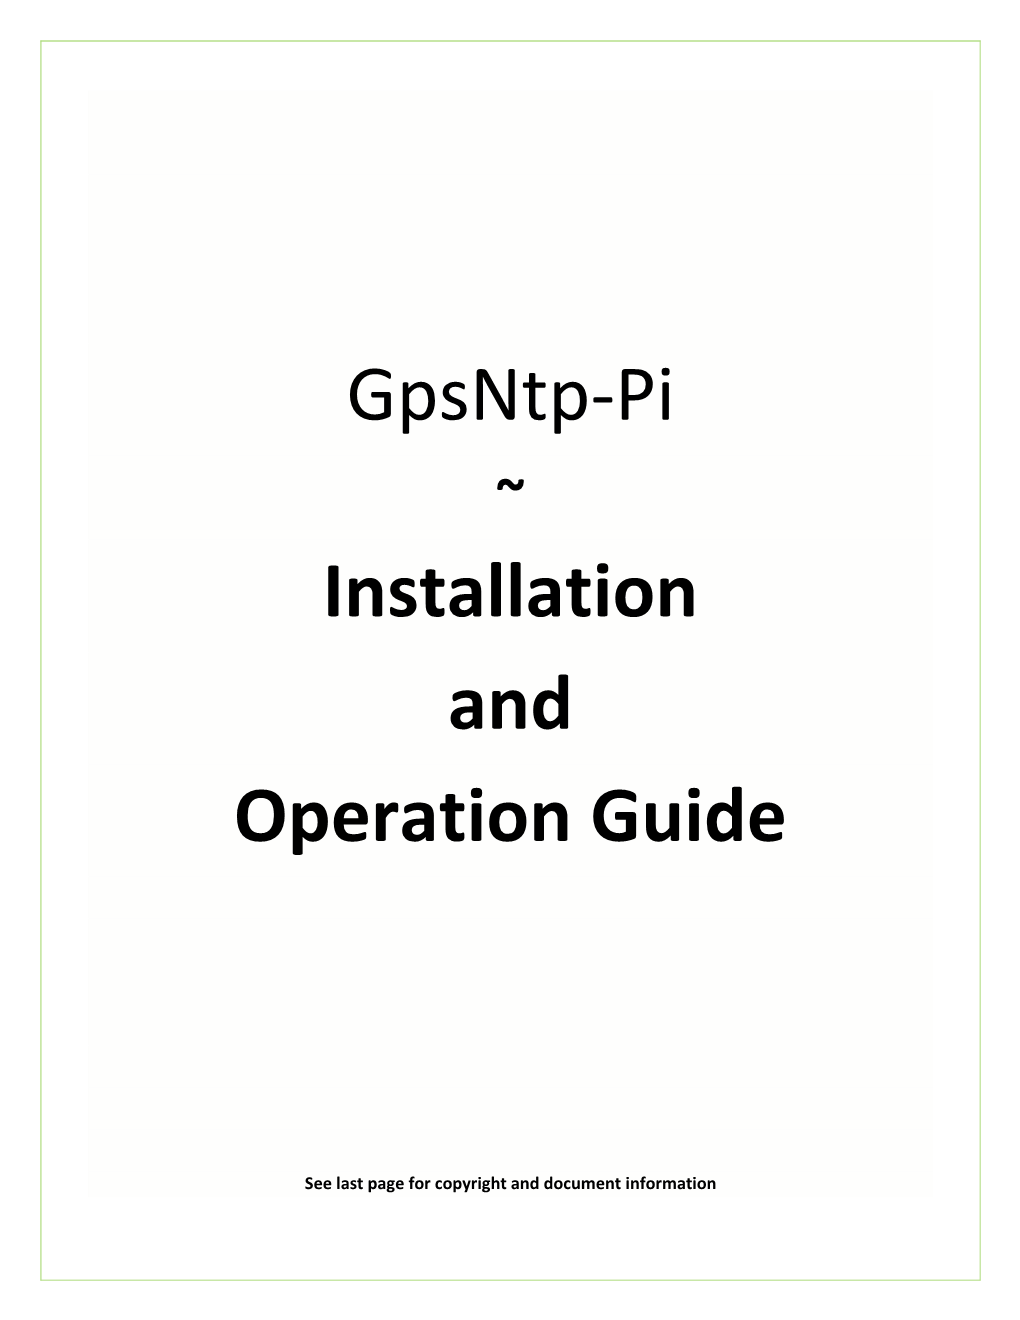 Gpsntp-Pi Installation and Operation Guide